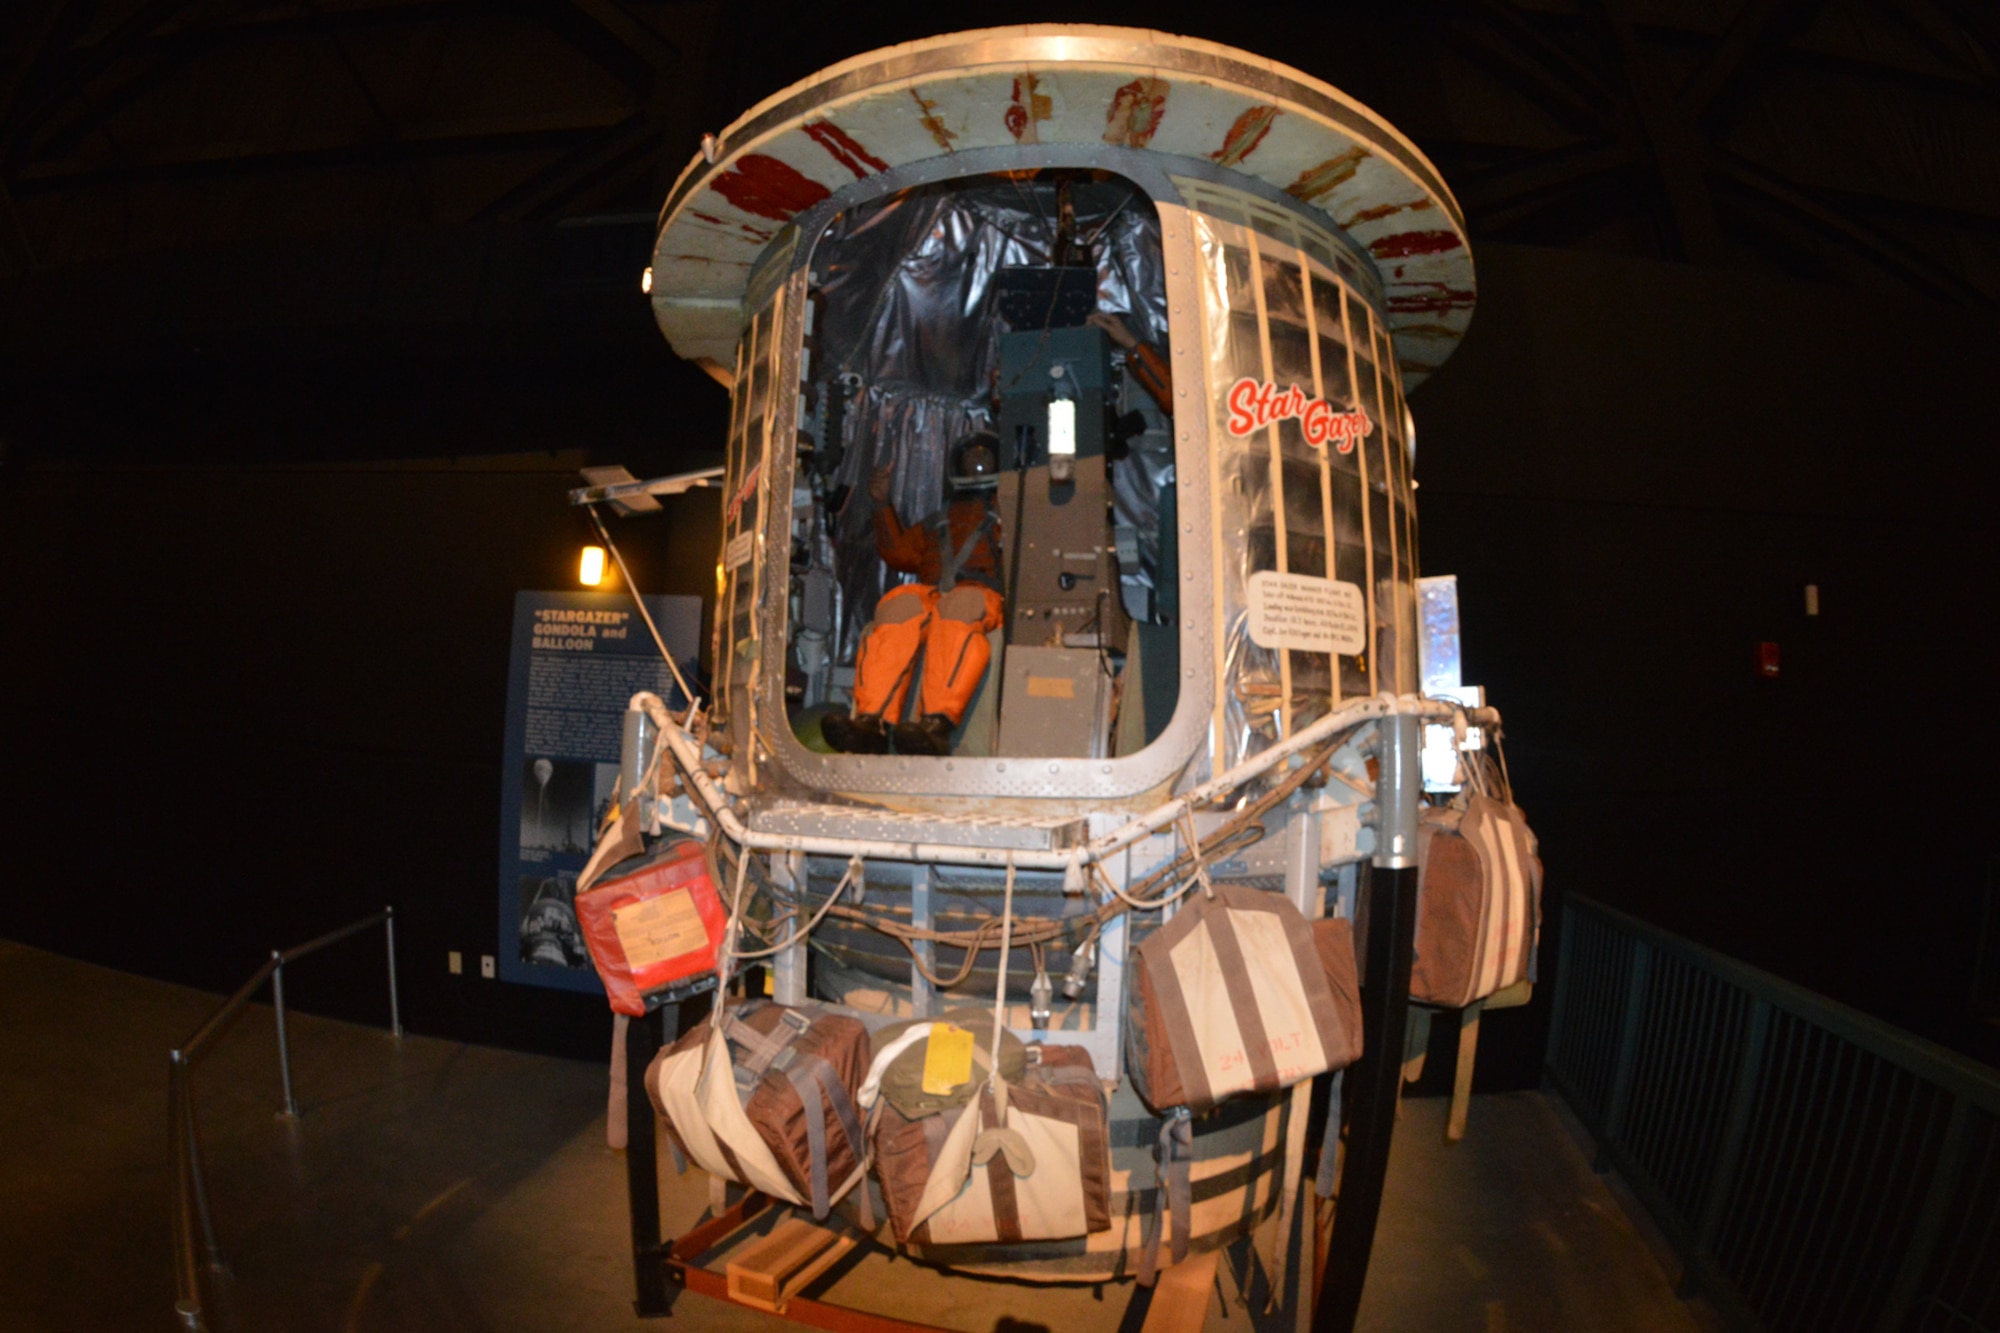 DAYTON, Ohio -- Stargazer Gondola on display in the Missile and Space Gallery at the National Museum of the United States Air Force. (U.S. Air Force photo)
